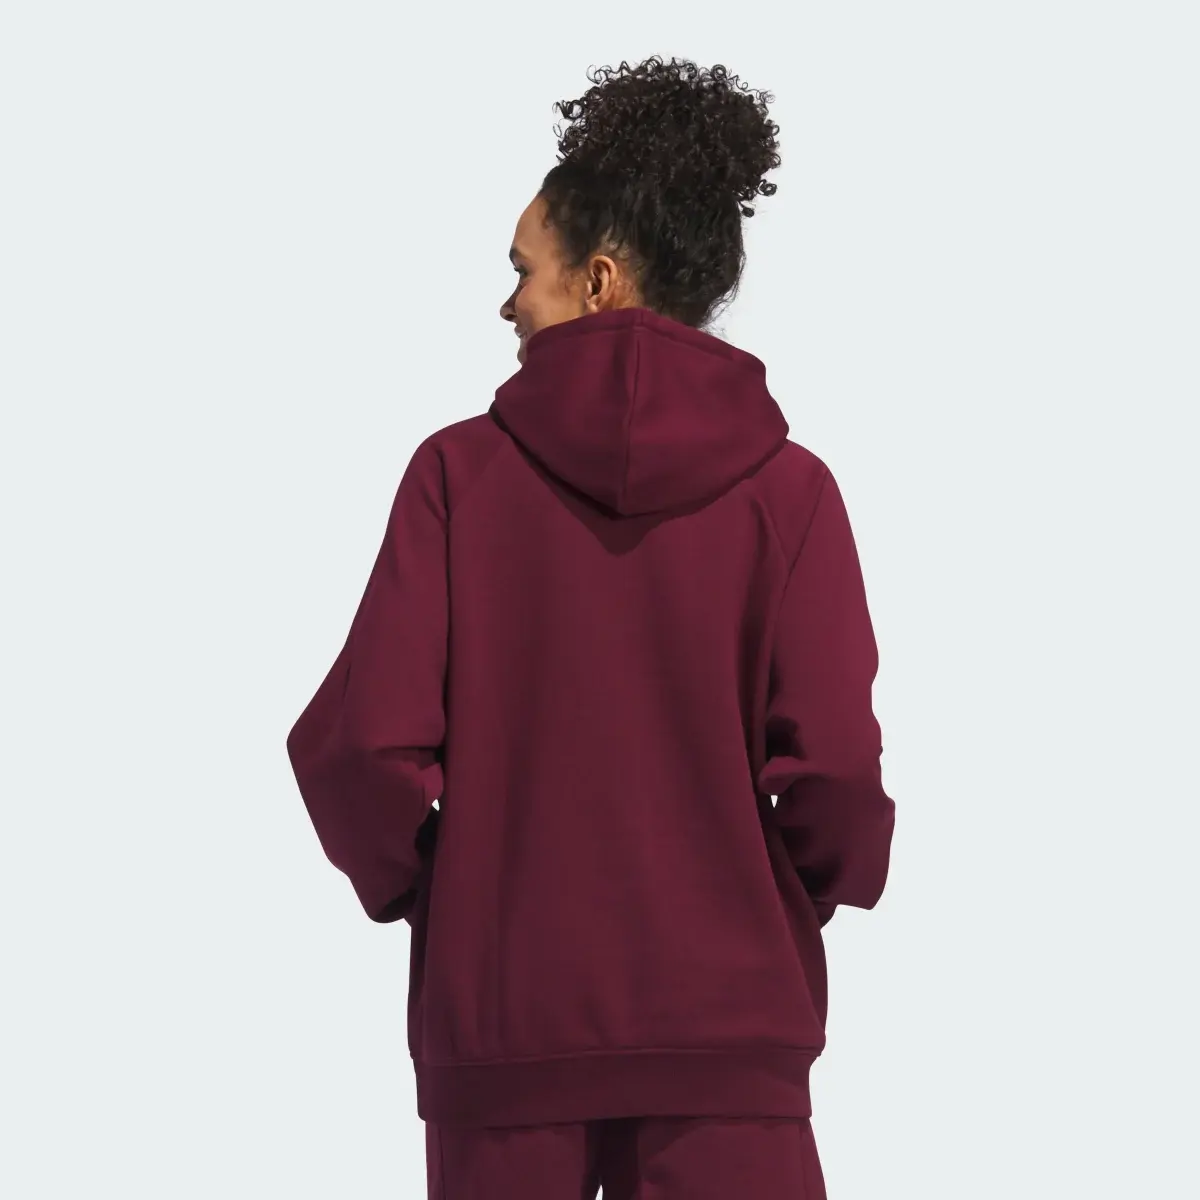 Adidas ALL SZN Valentine's Day Pullover Hoodie. 3